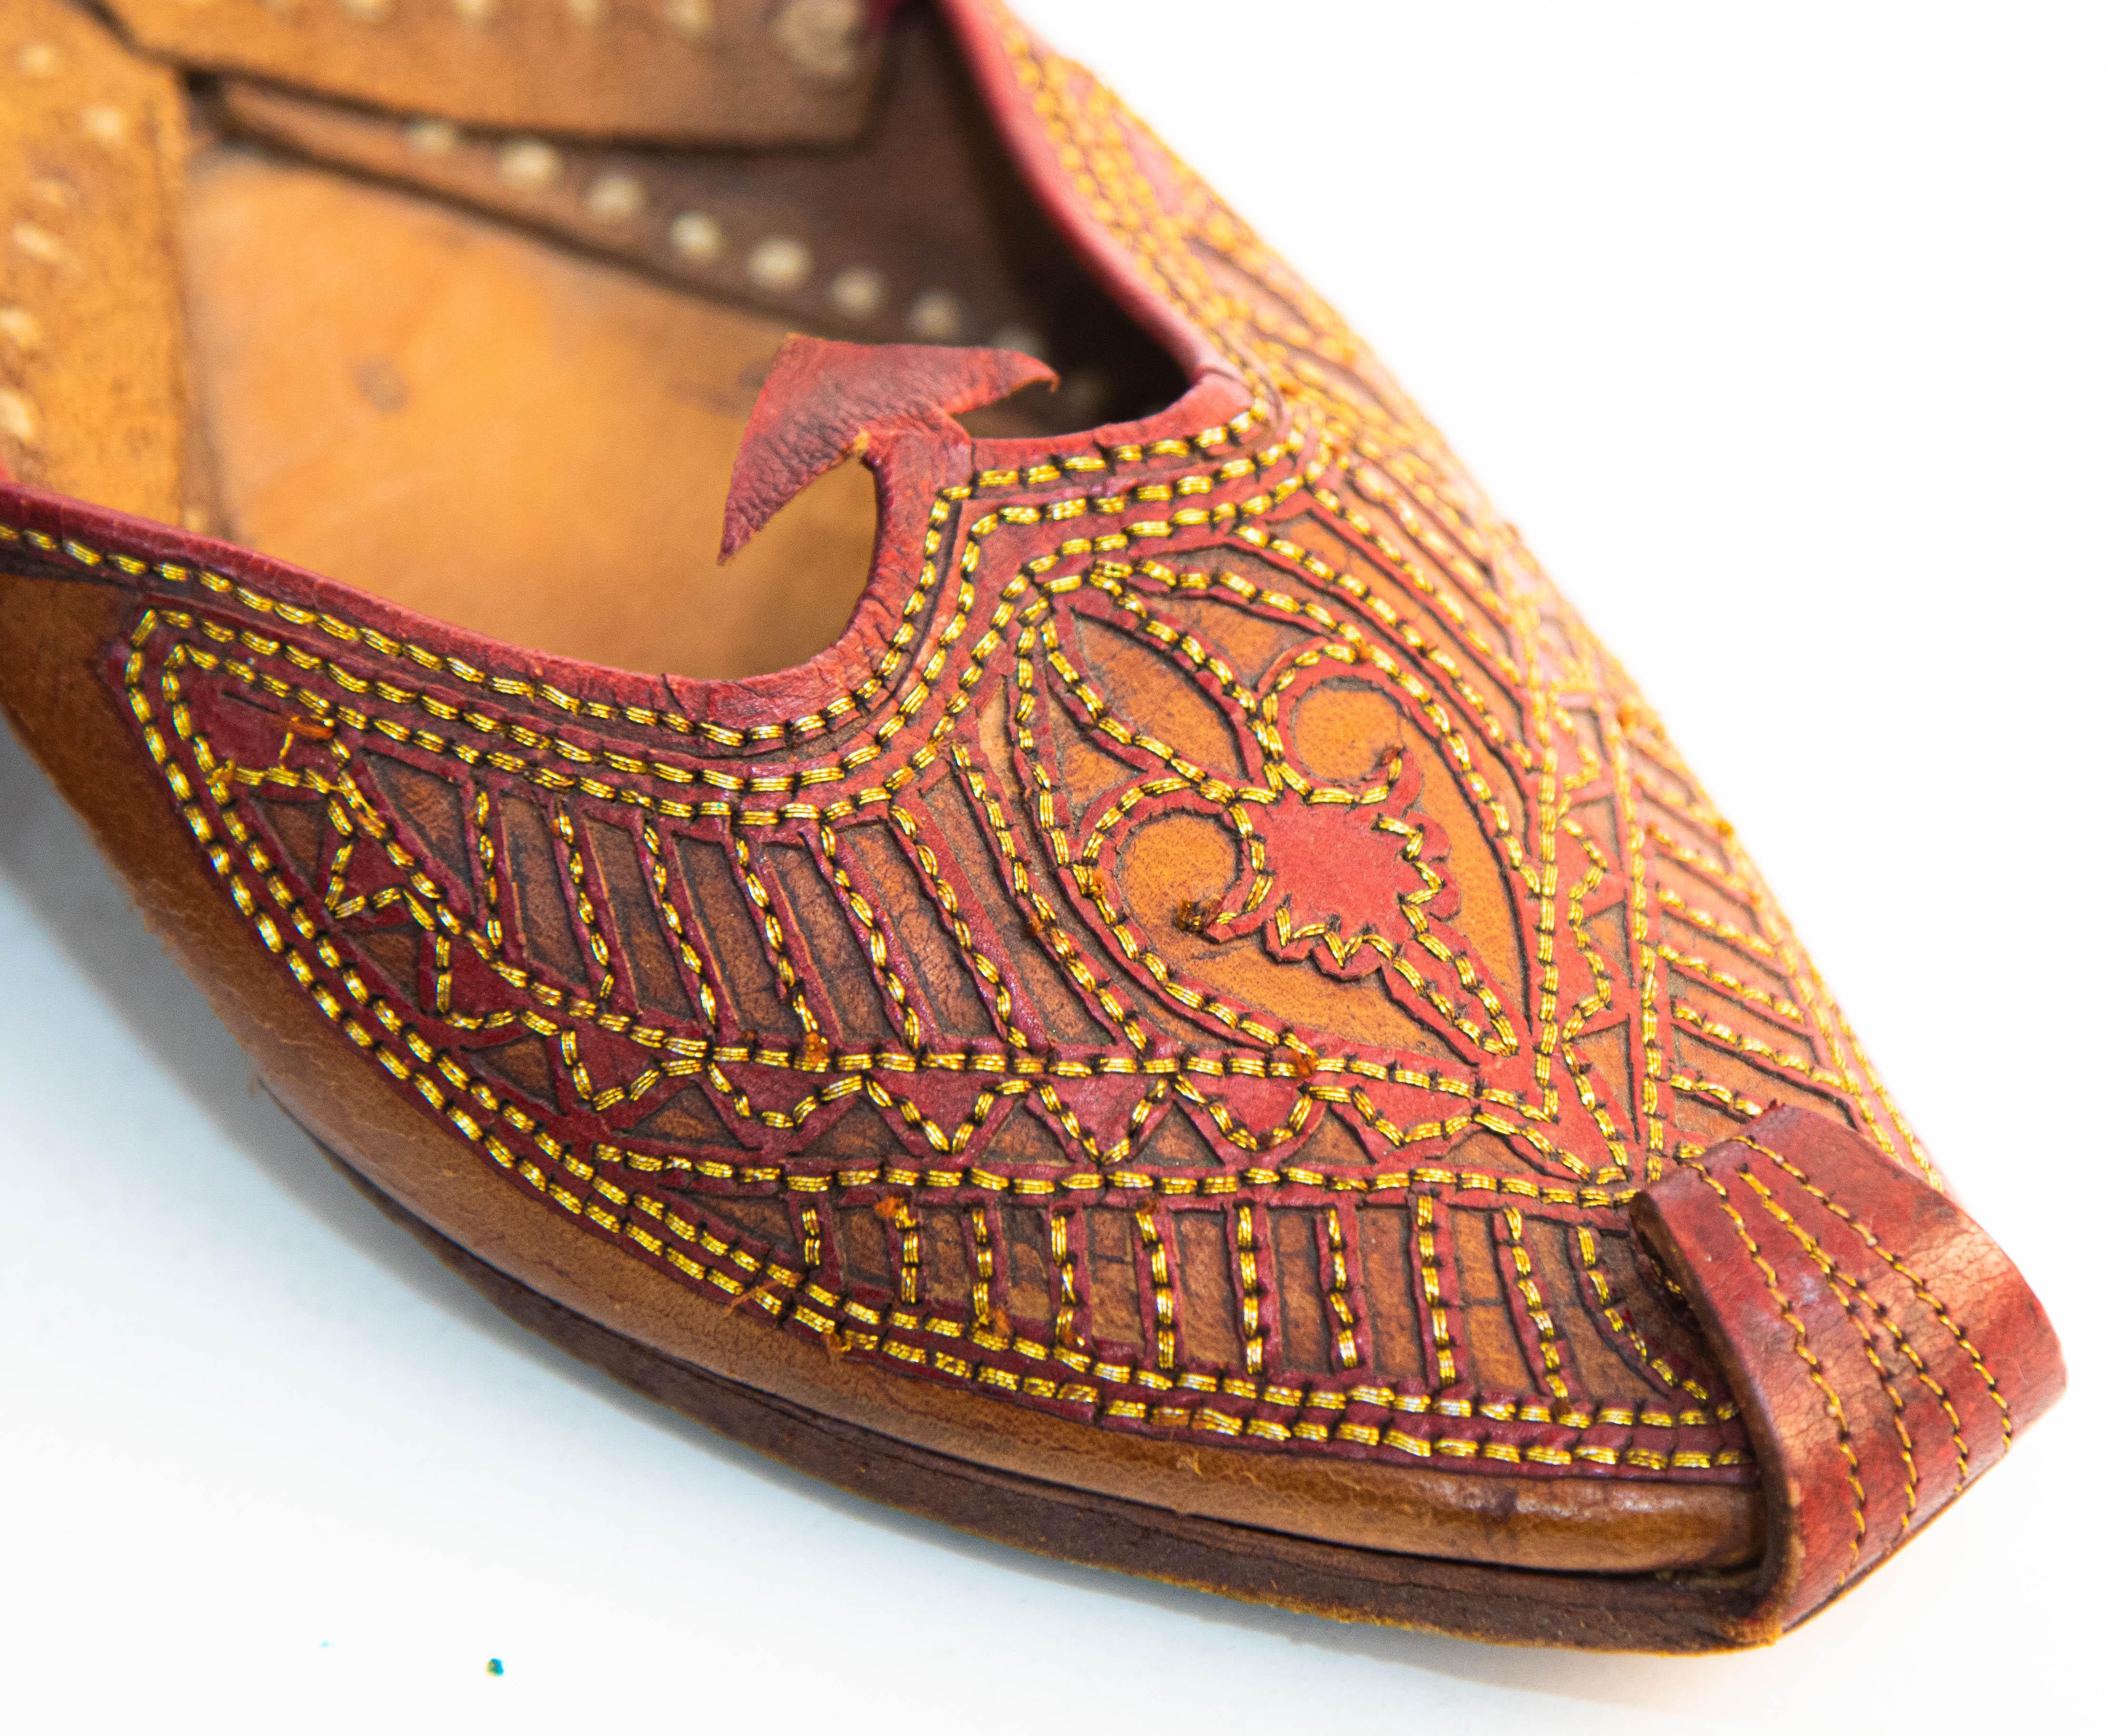 Vintage Arabian Mughal Leather Shoes with Gold Embroidered Curled Toe For Sale 1